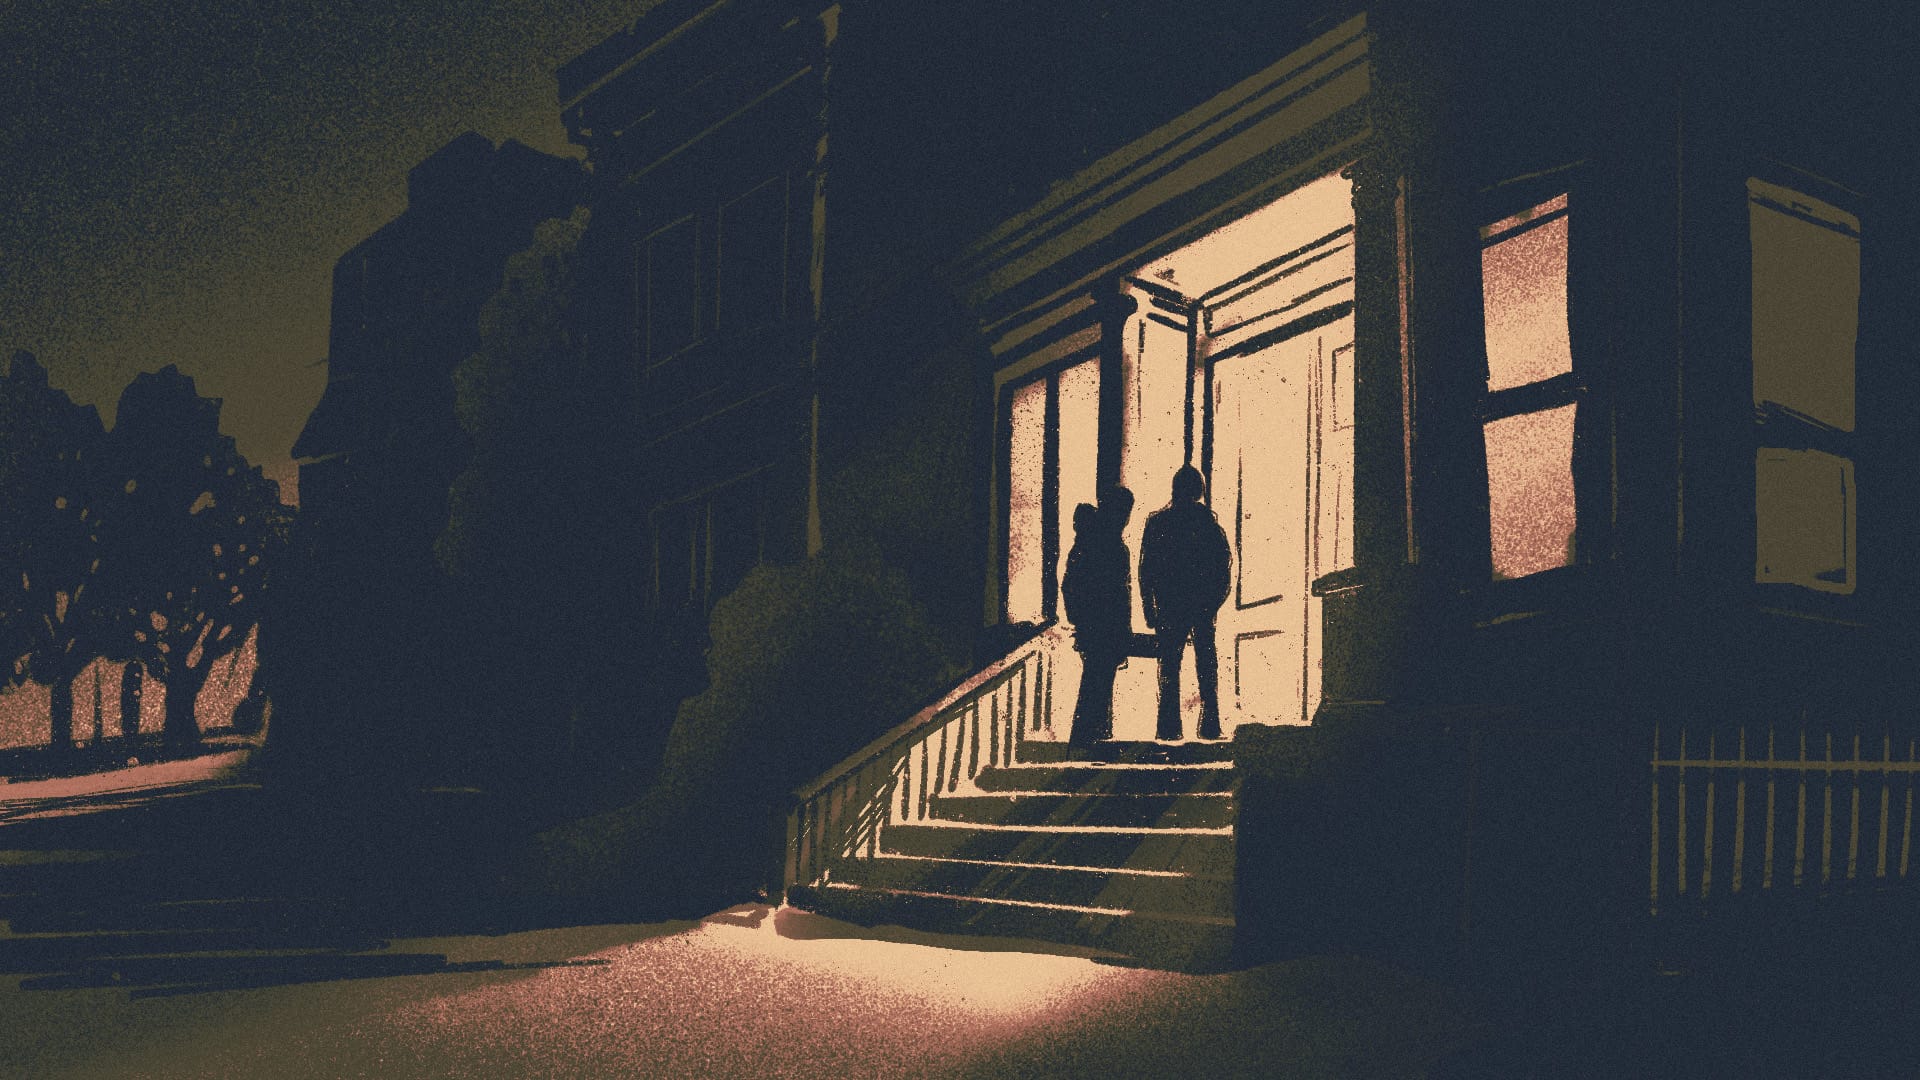 An ominous night scene; two dark figures stand on a residential porch in a small pool of light